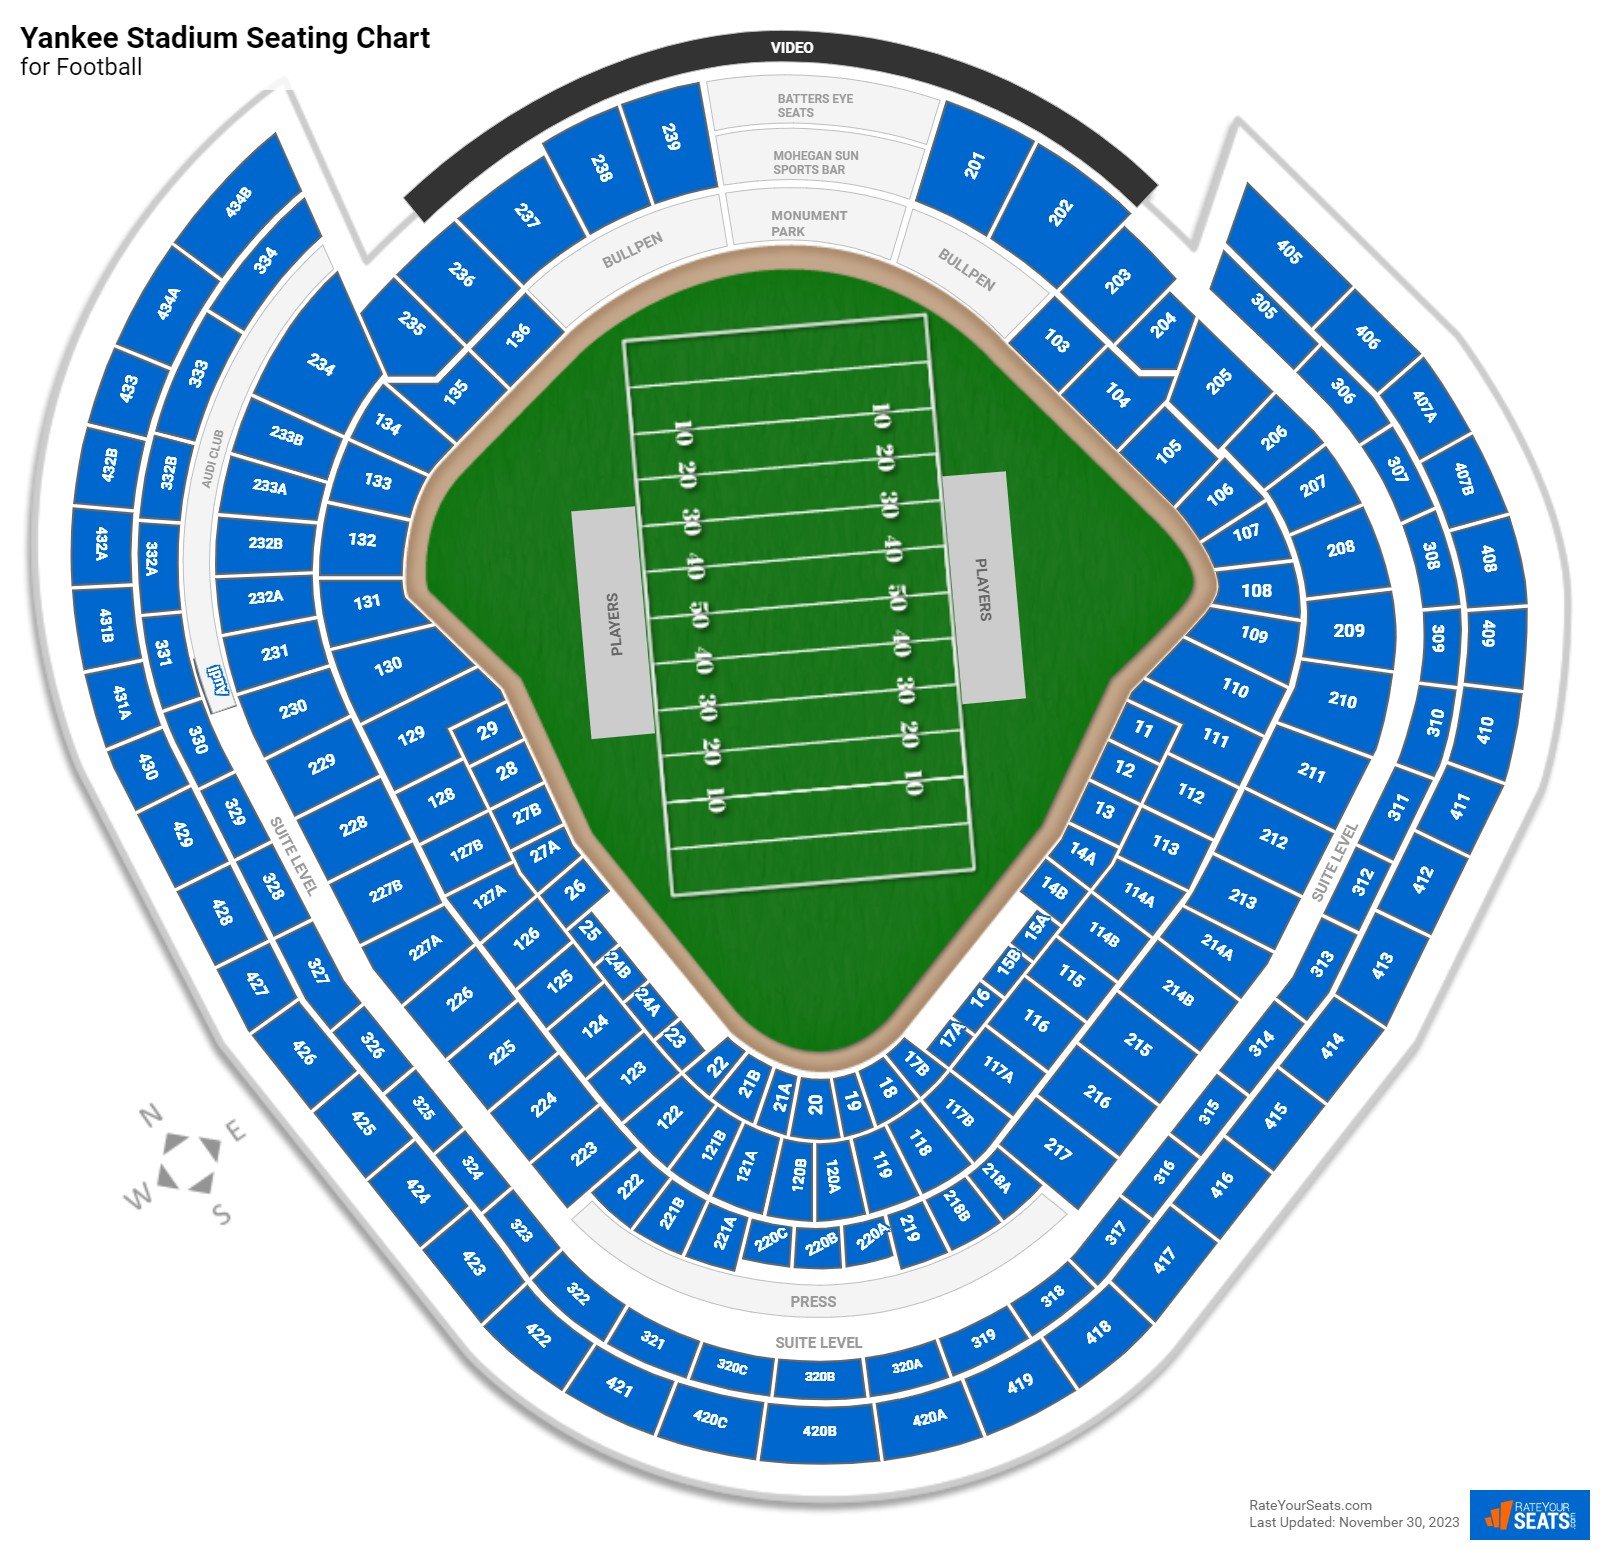 Section 212 at Yankee Stadium for Football - RateYourSeats.com